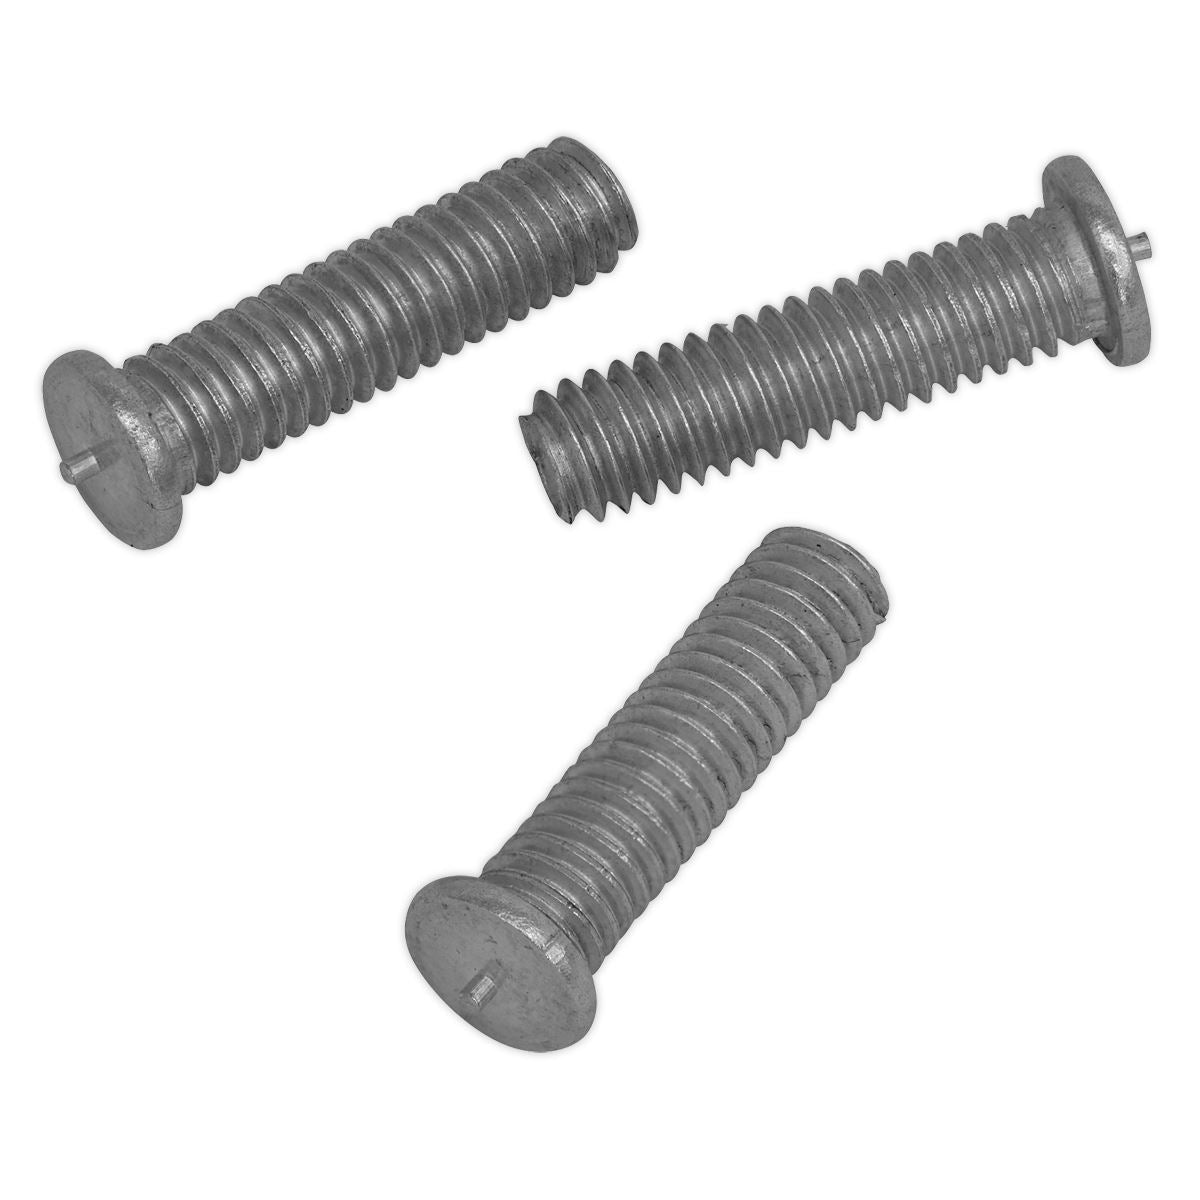 Sealey Al-Mg Studs for SR2000 Pack of 10